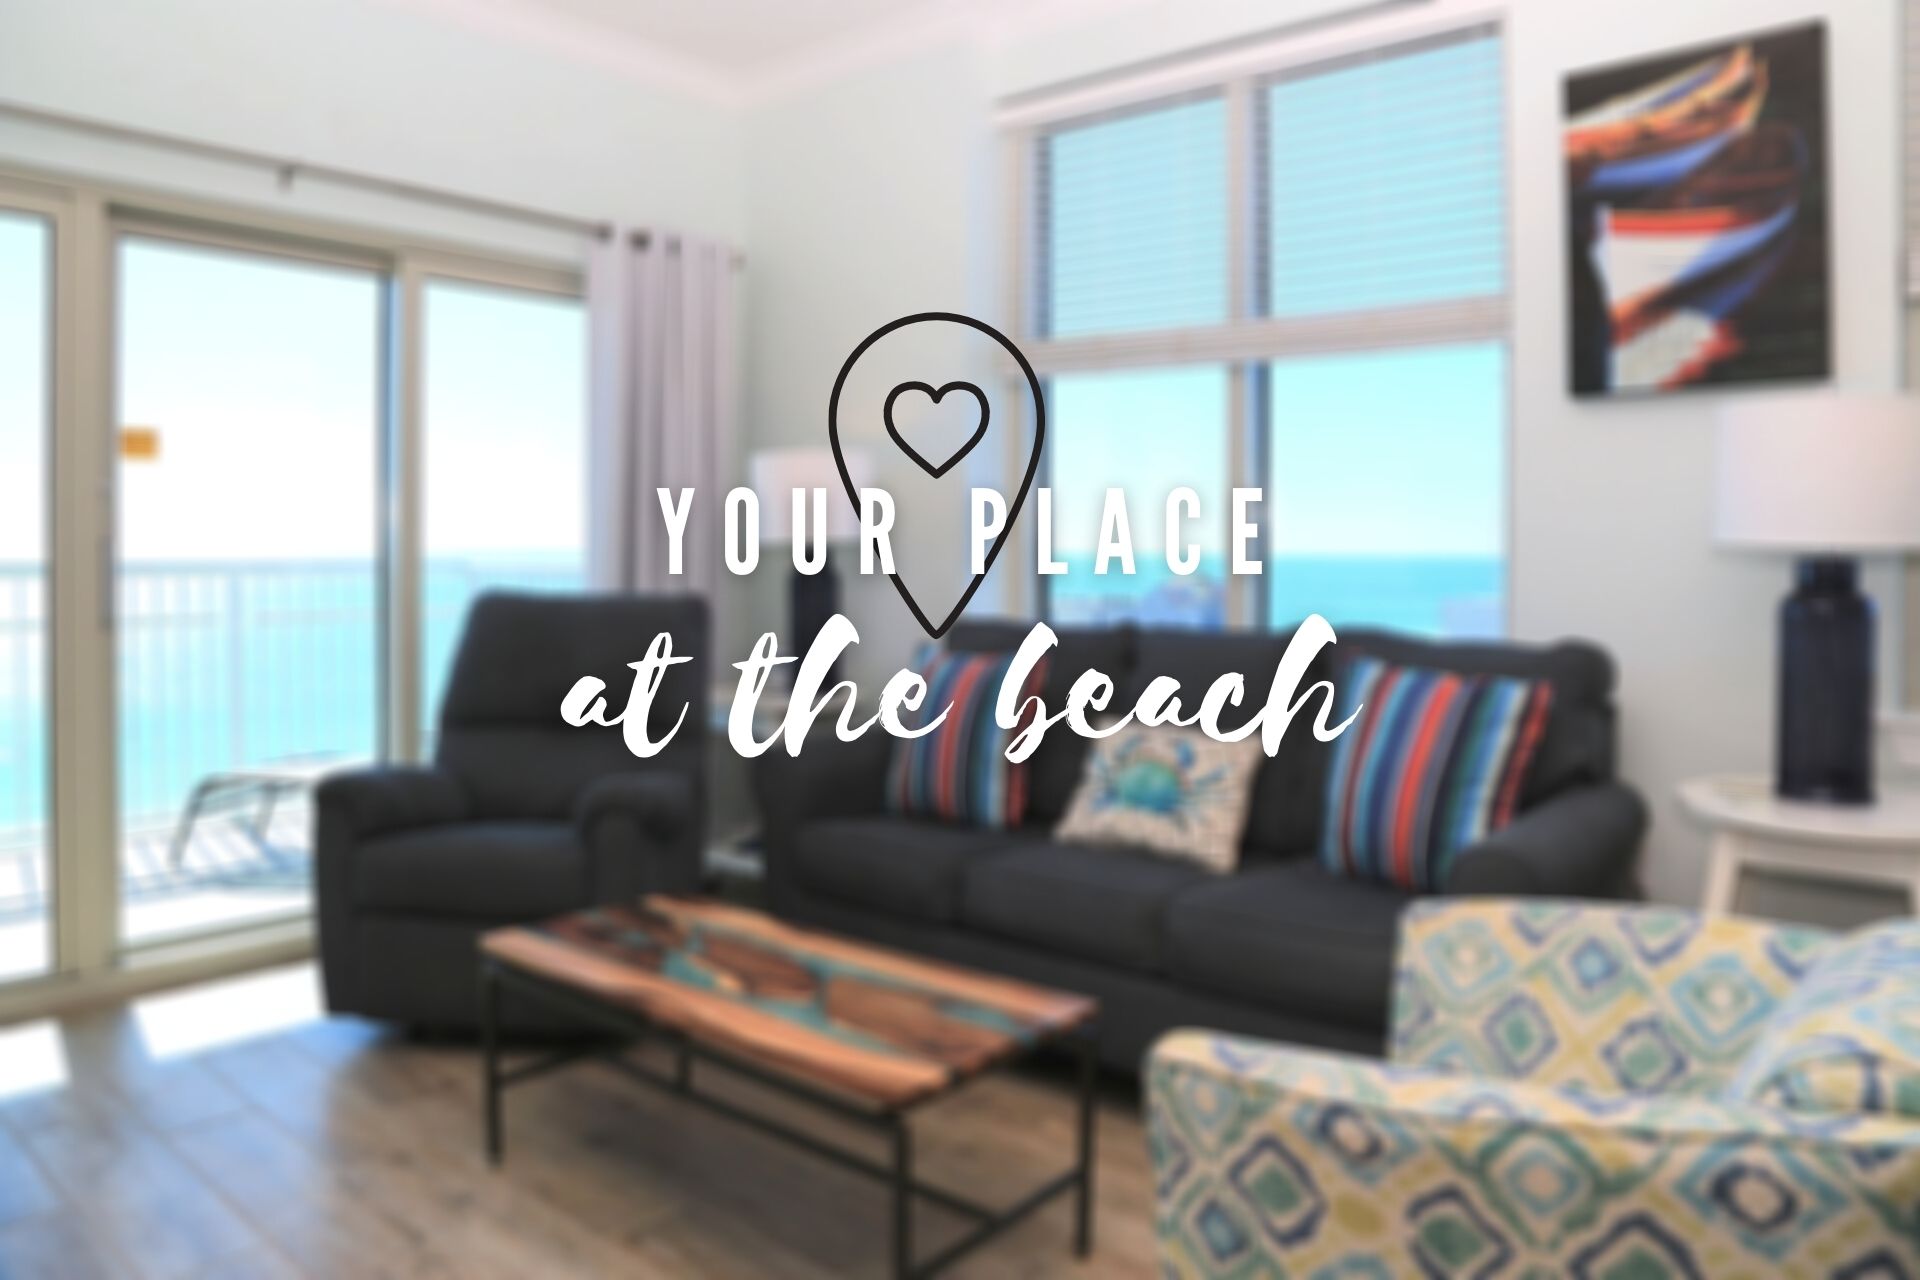 A promotional image for your place at the beach